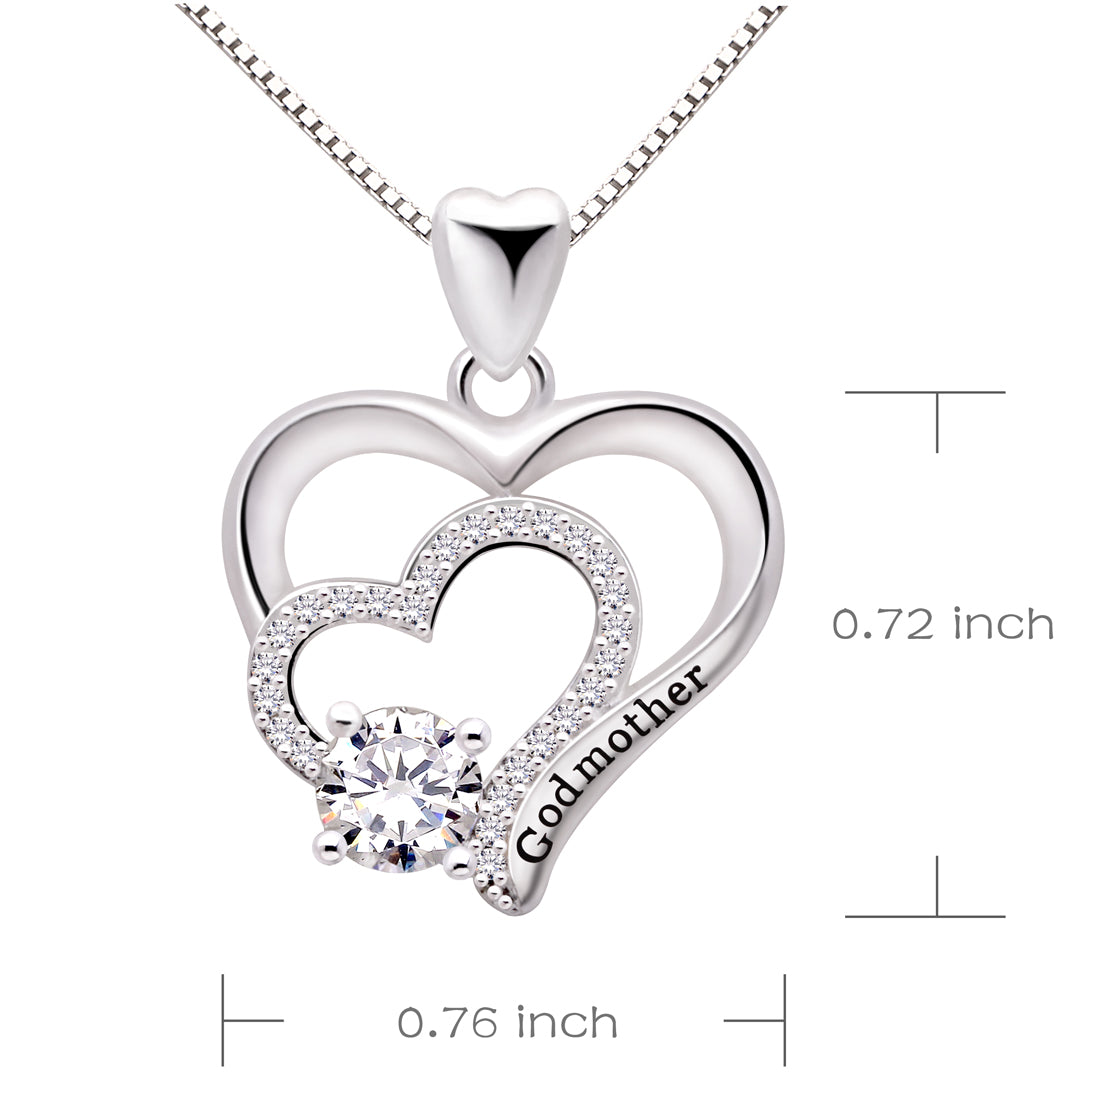 ALOV Jewelry Sterling Silver Godmother Cubic Zirconia Pendant Necklace